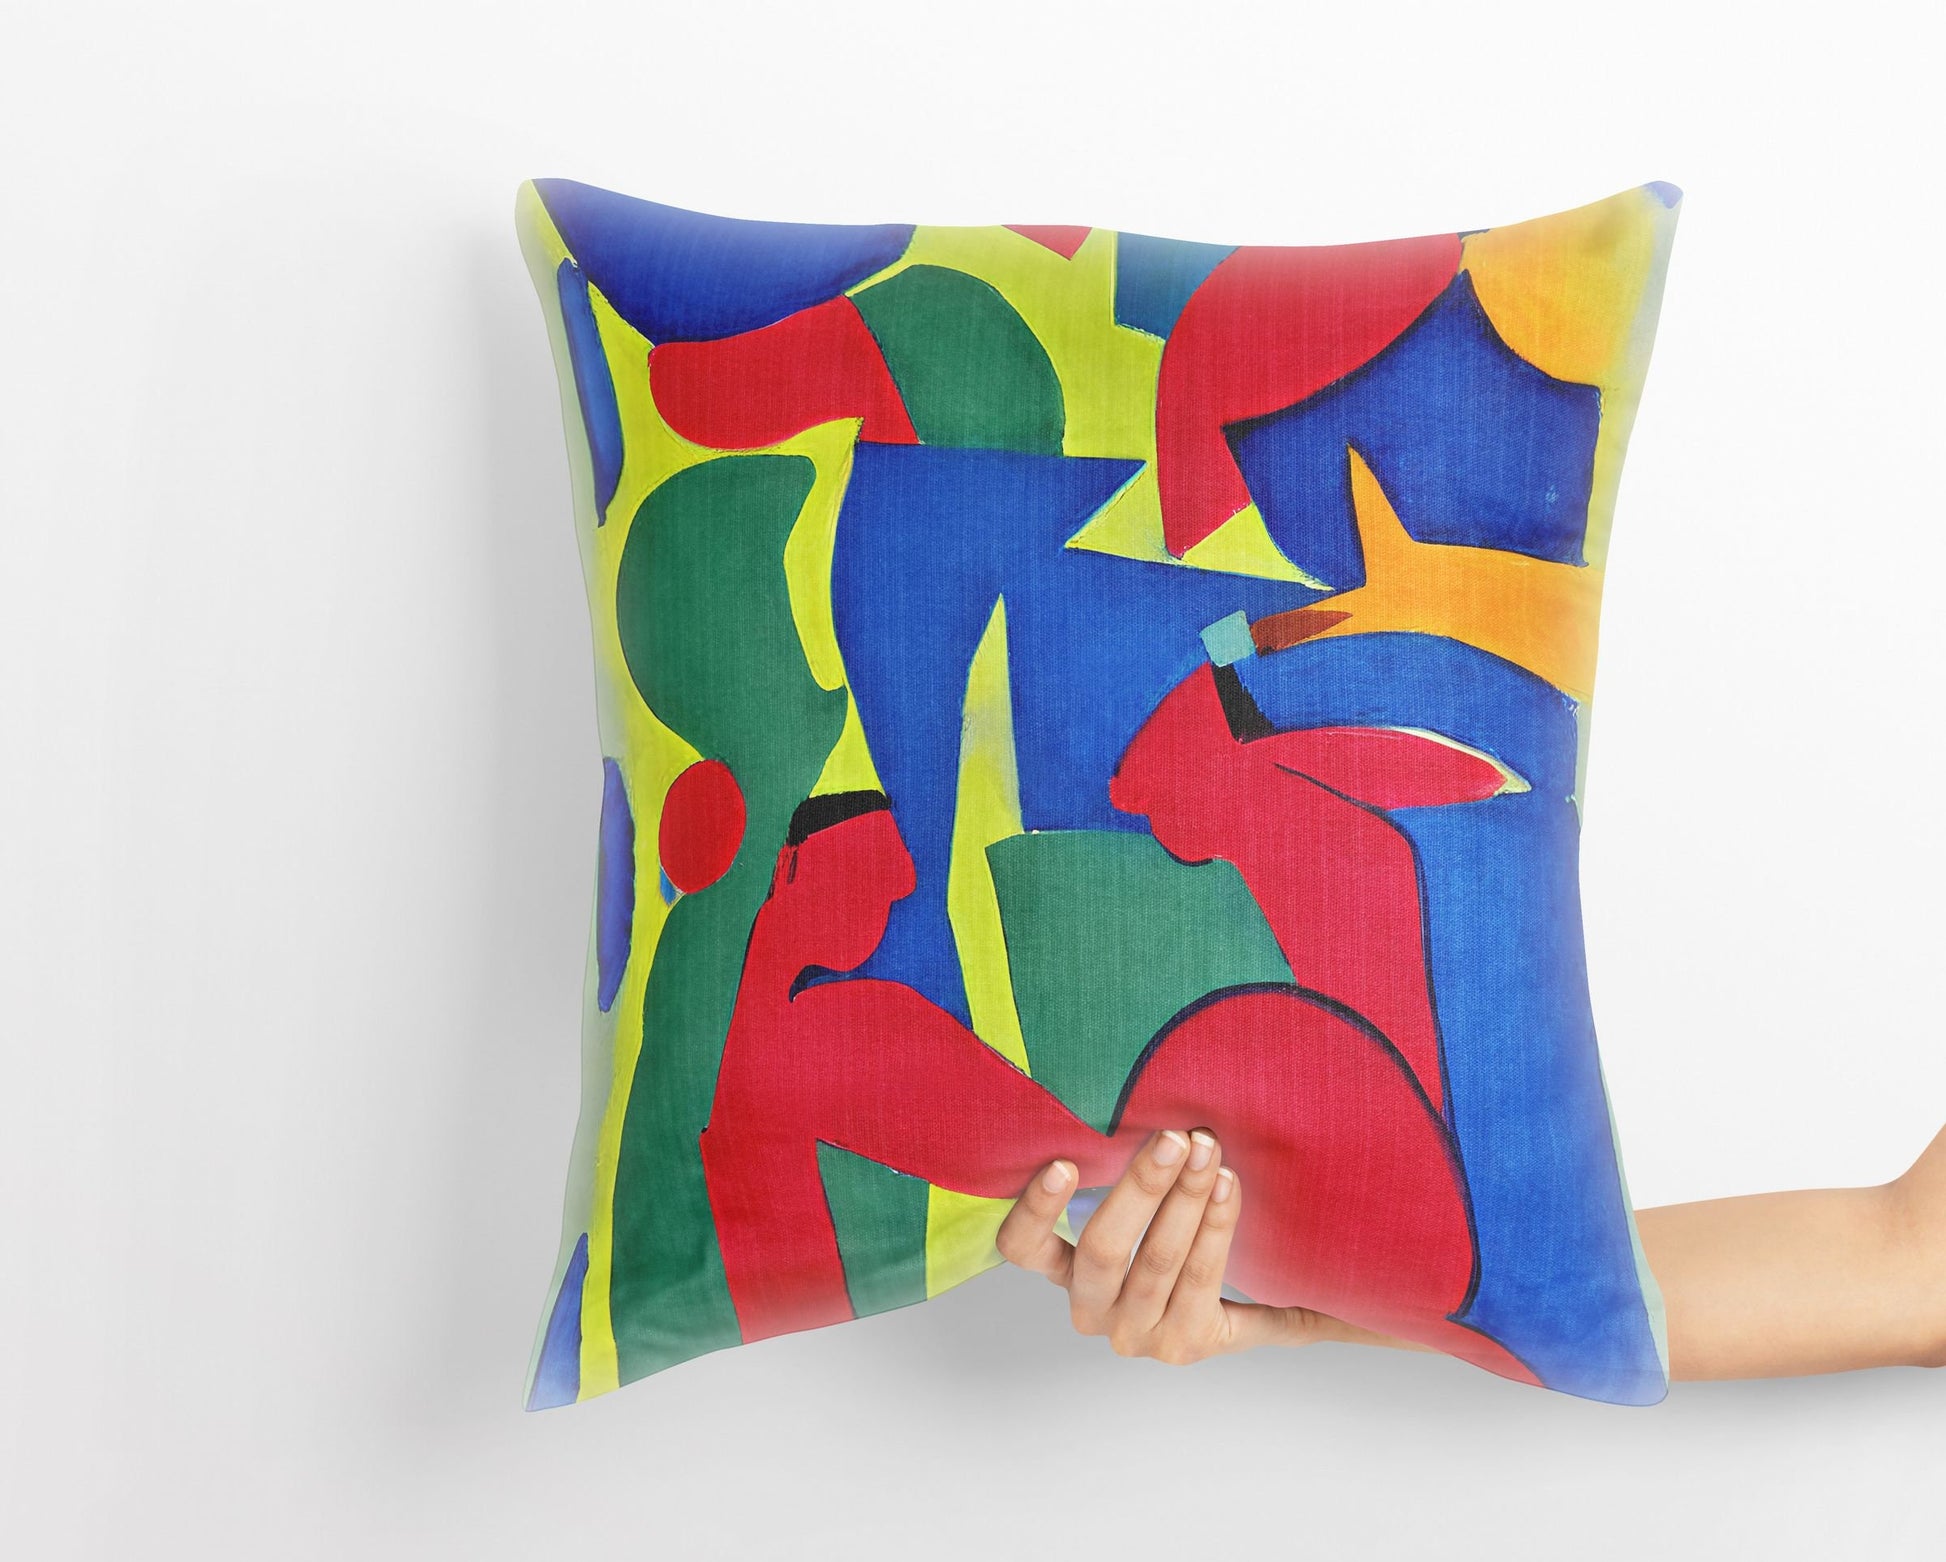 Abstract Throw Pillow, Throw Pillow Cover, Cat Pillow, Designer Pillow, Contemporary Pillow, Square Pillow, Home And Living, Holiday Gift